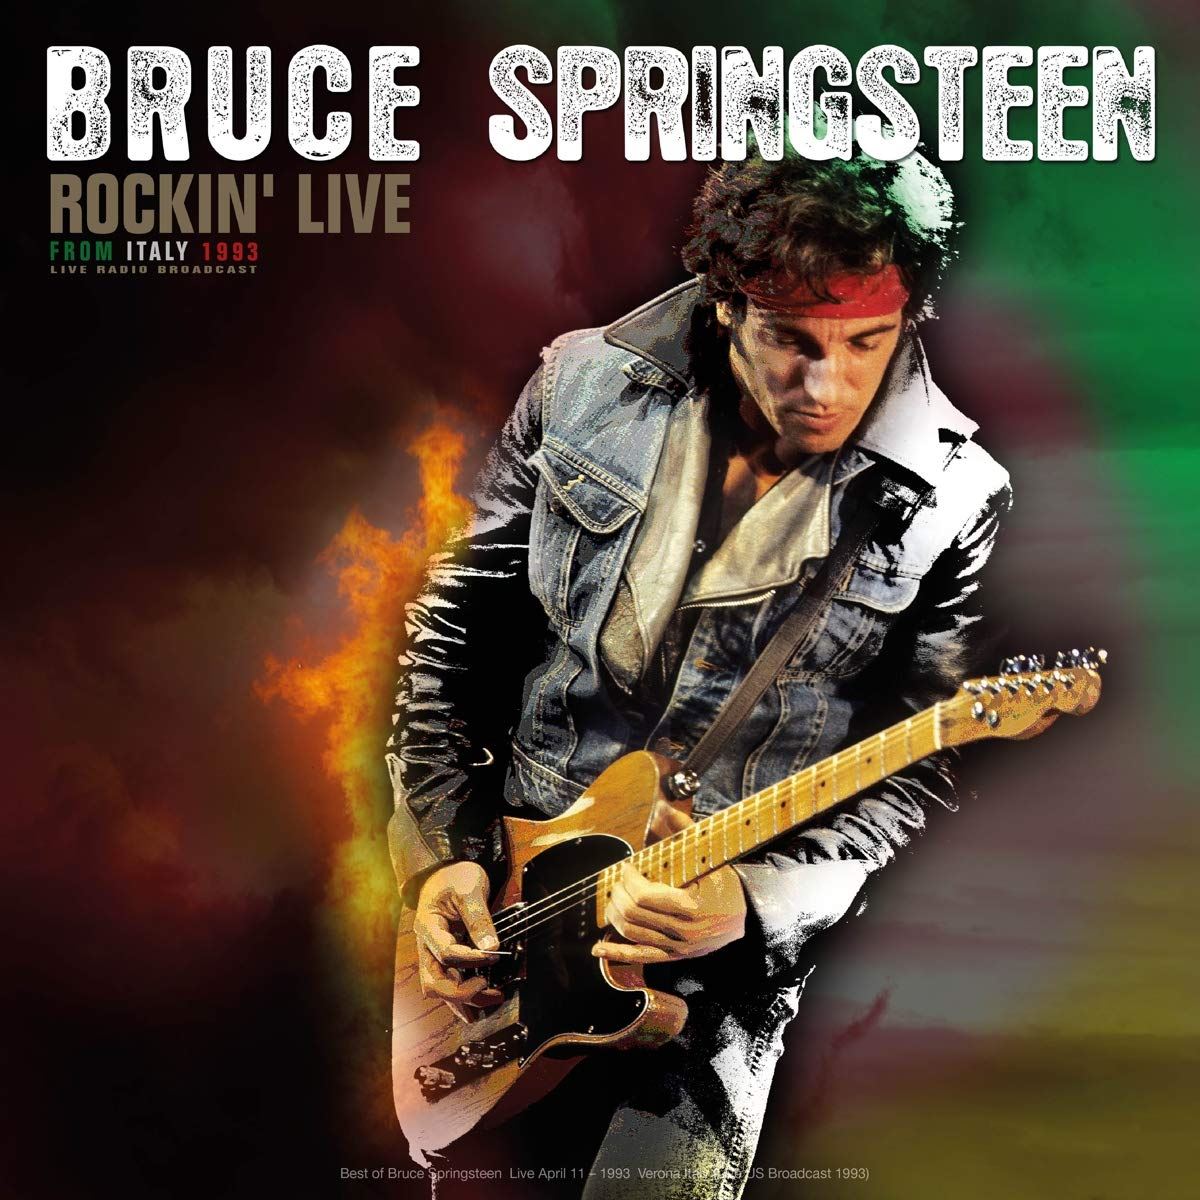 Bruce Springsteen - Best Of Rockin Live From Italy 1993 - Vinyl